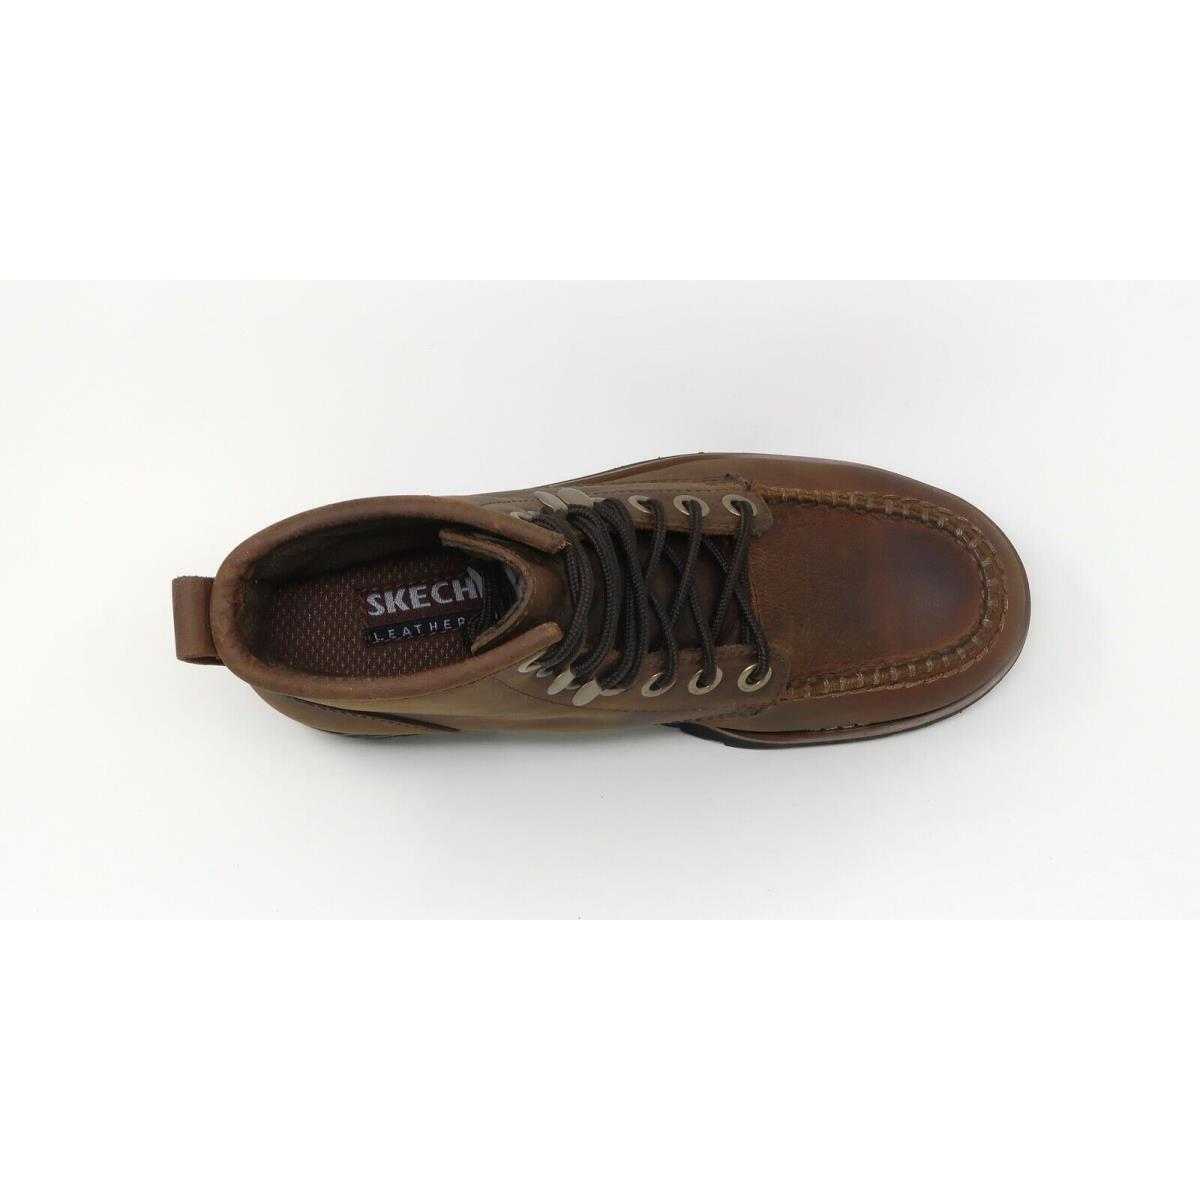 Skechers shoes Maxx - Brown , Crazy Horse Brown Manufacturer 1